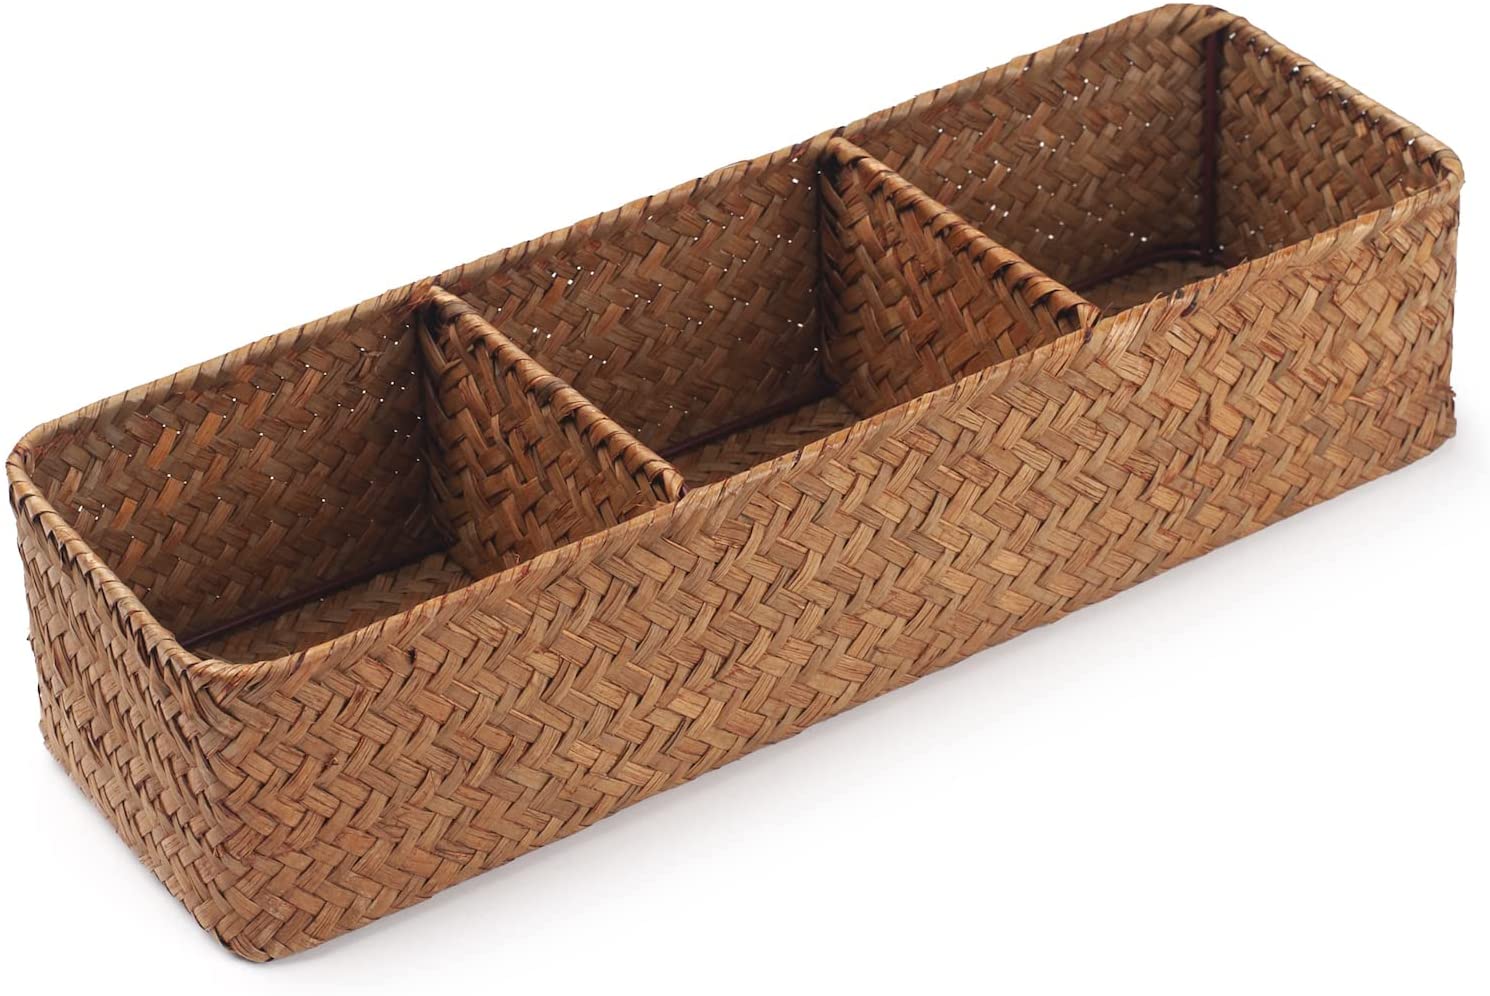 Seagrass Basket 3 Section-Tray BK323155